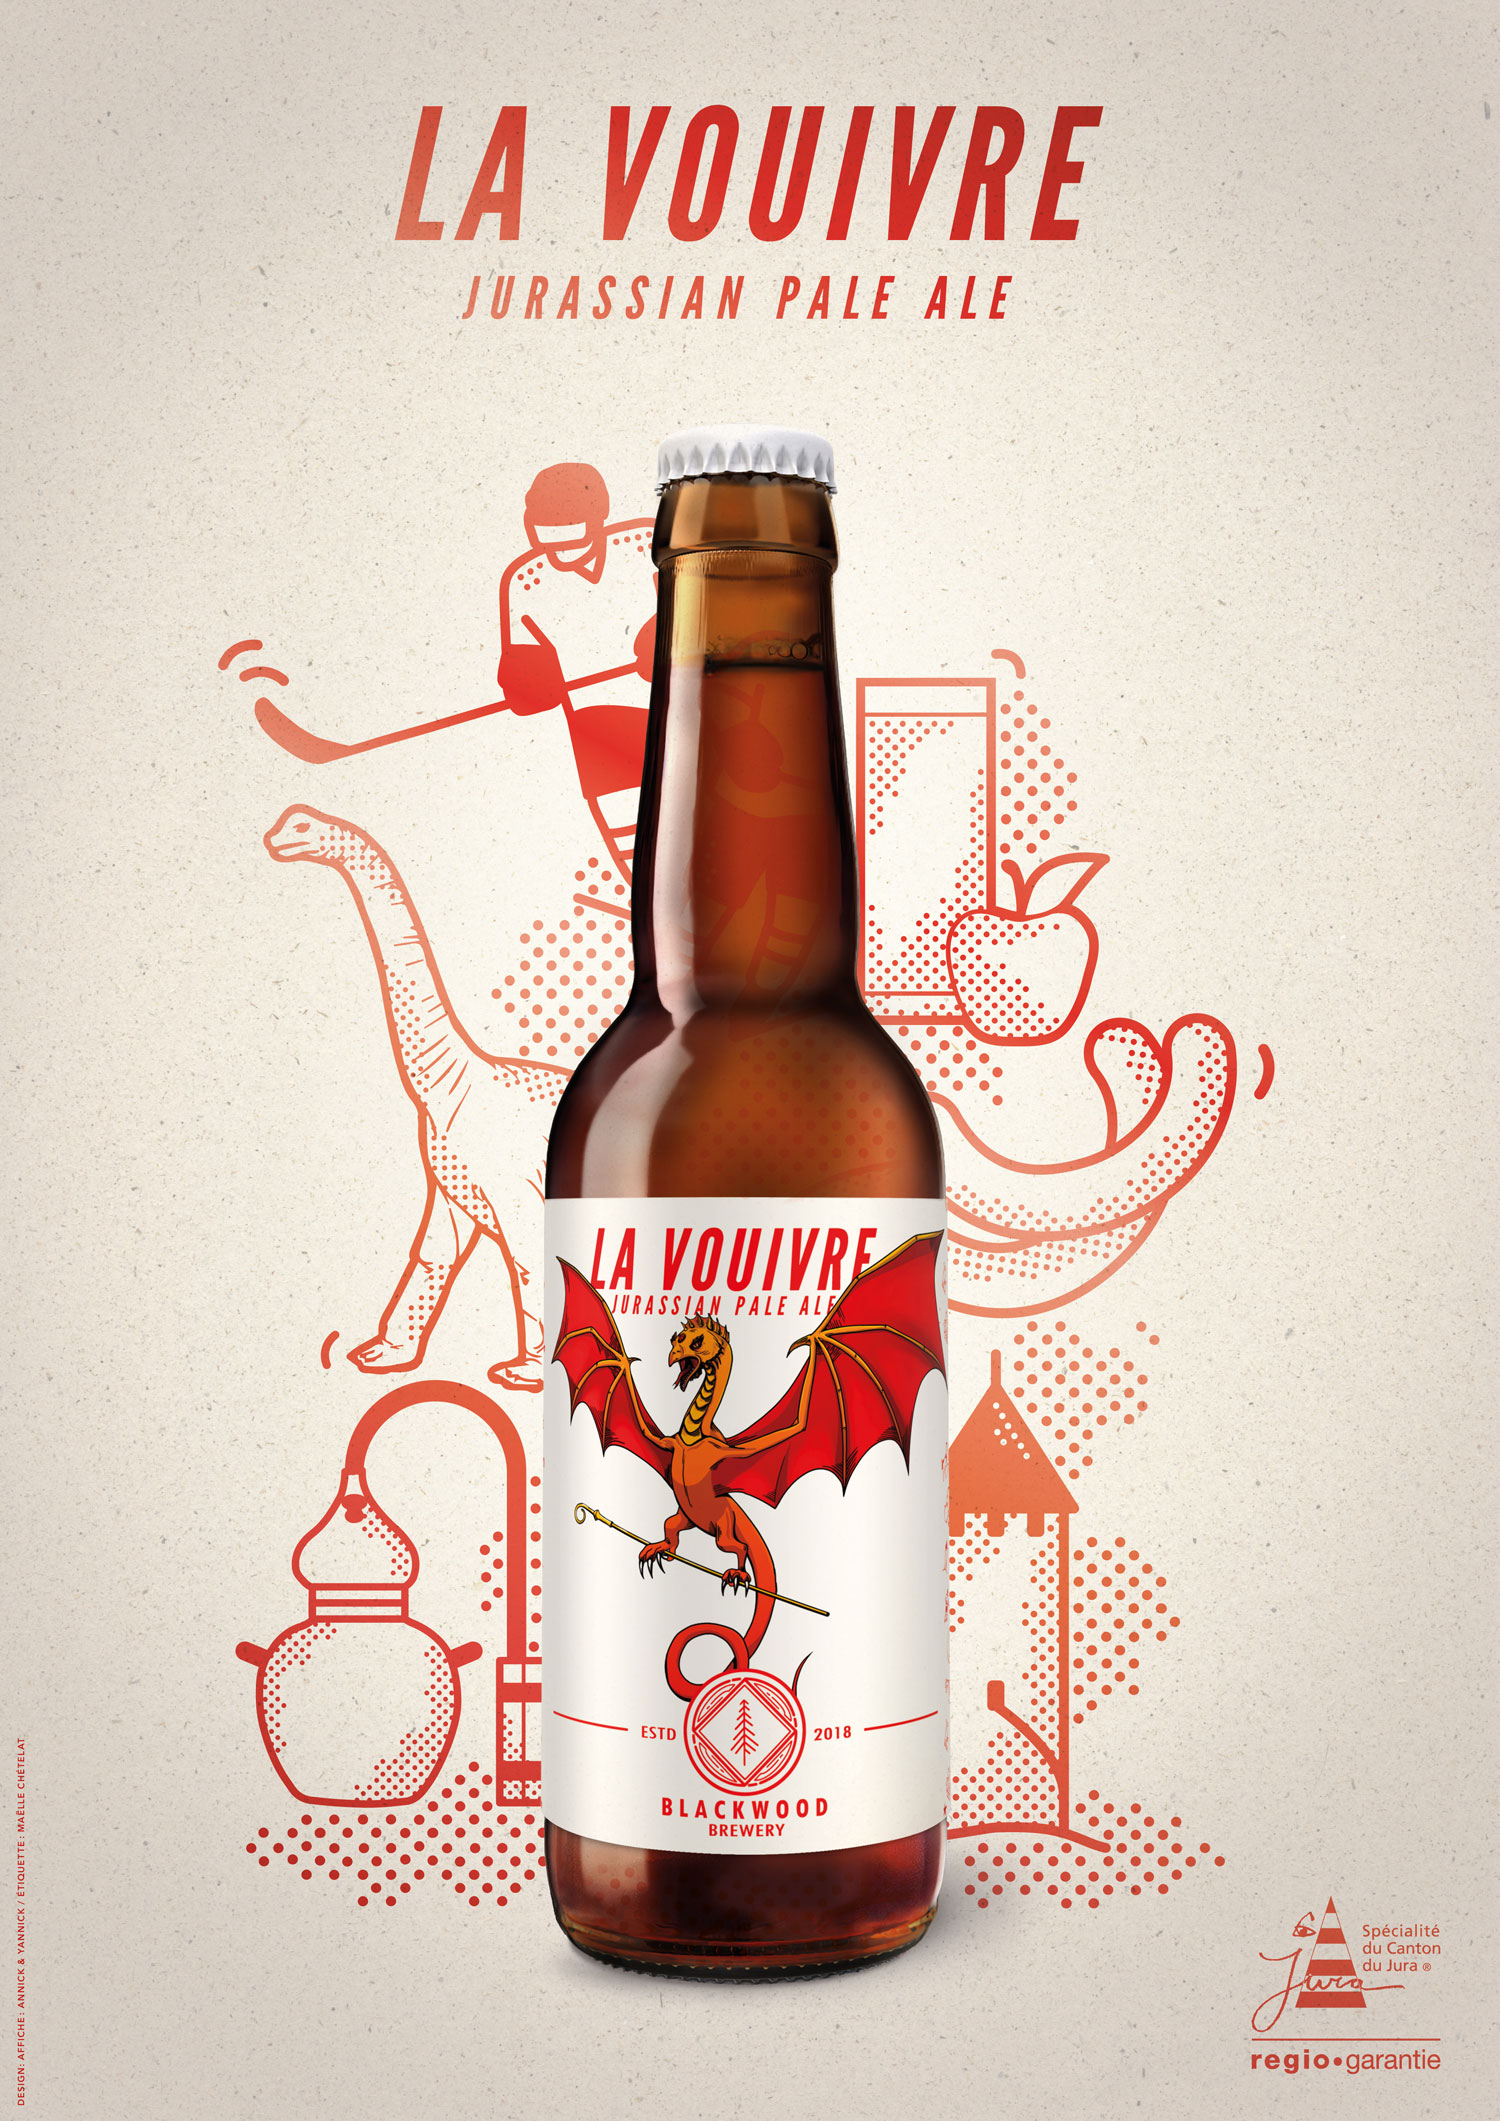 La Vouivre. Jurassian Pale Ale by Blackwood Brewery, Porrentruy, Jura. Product imaging and Poster Design by Annick & Yannick.